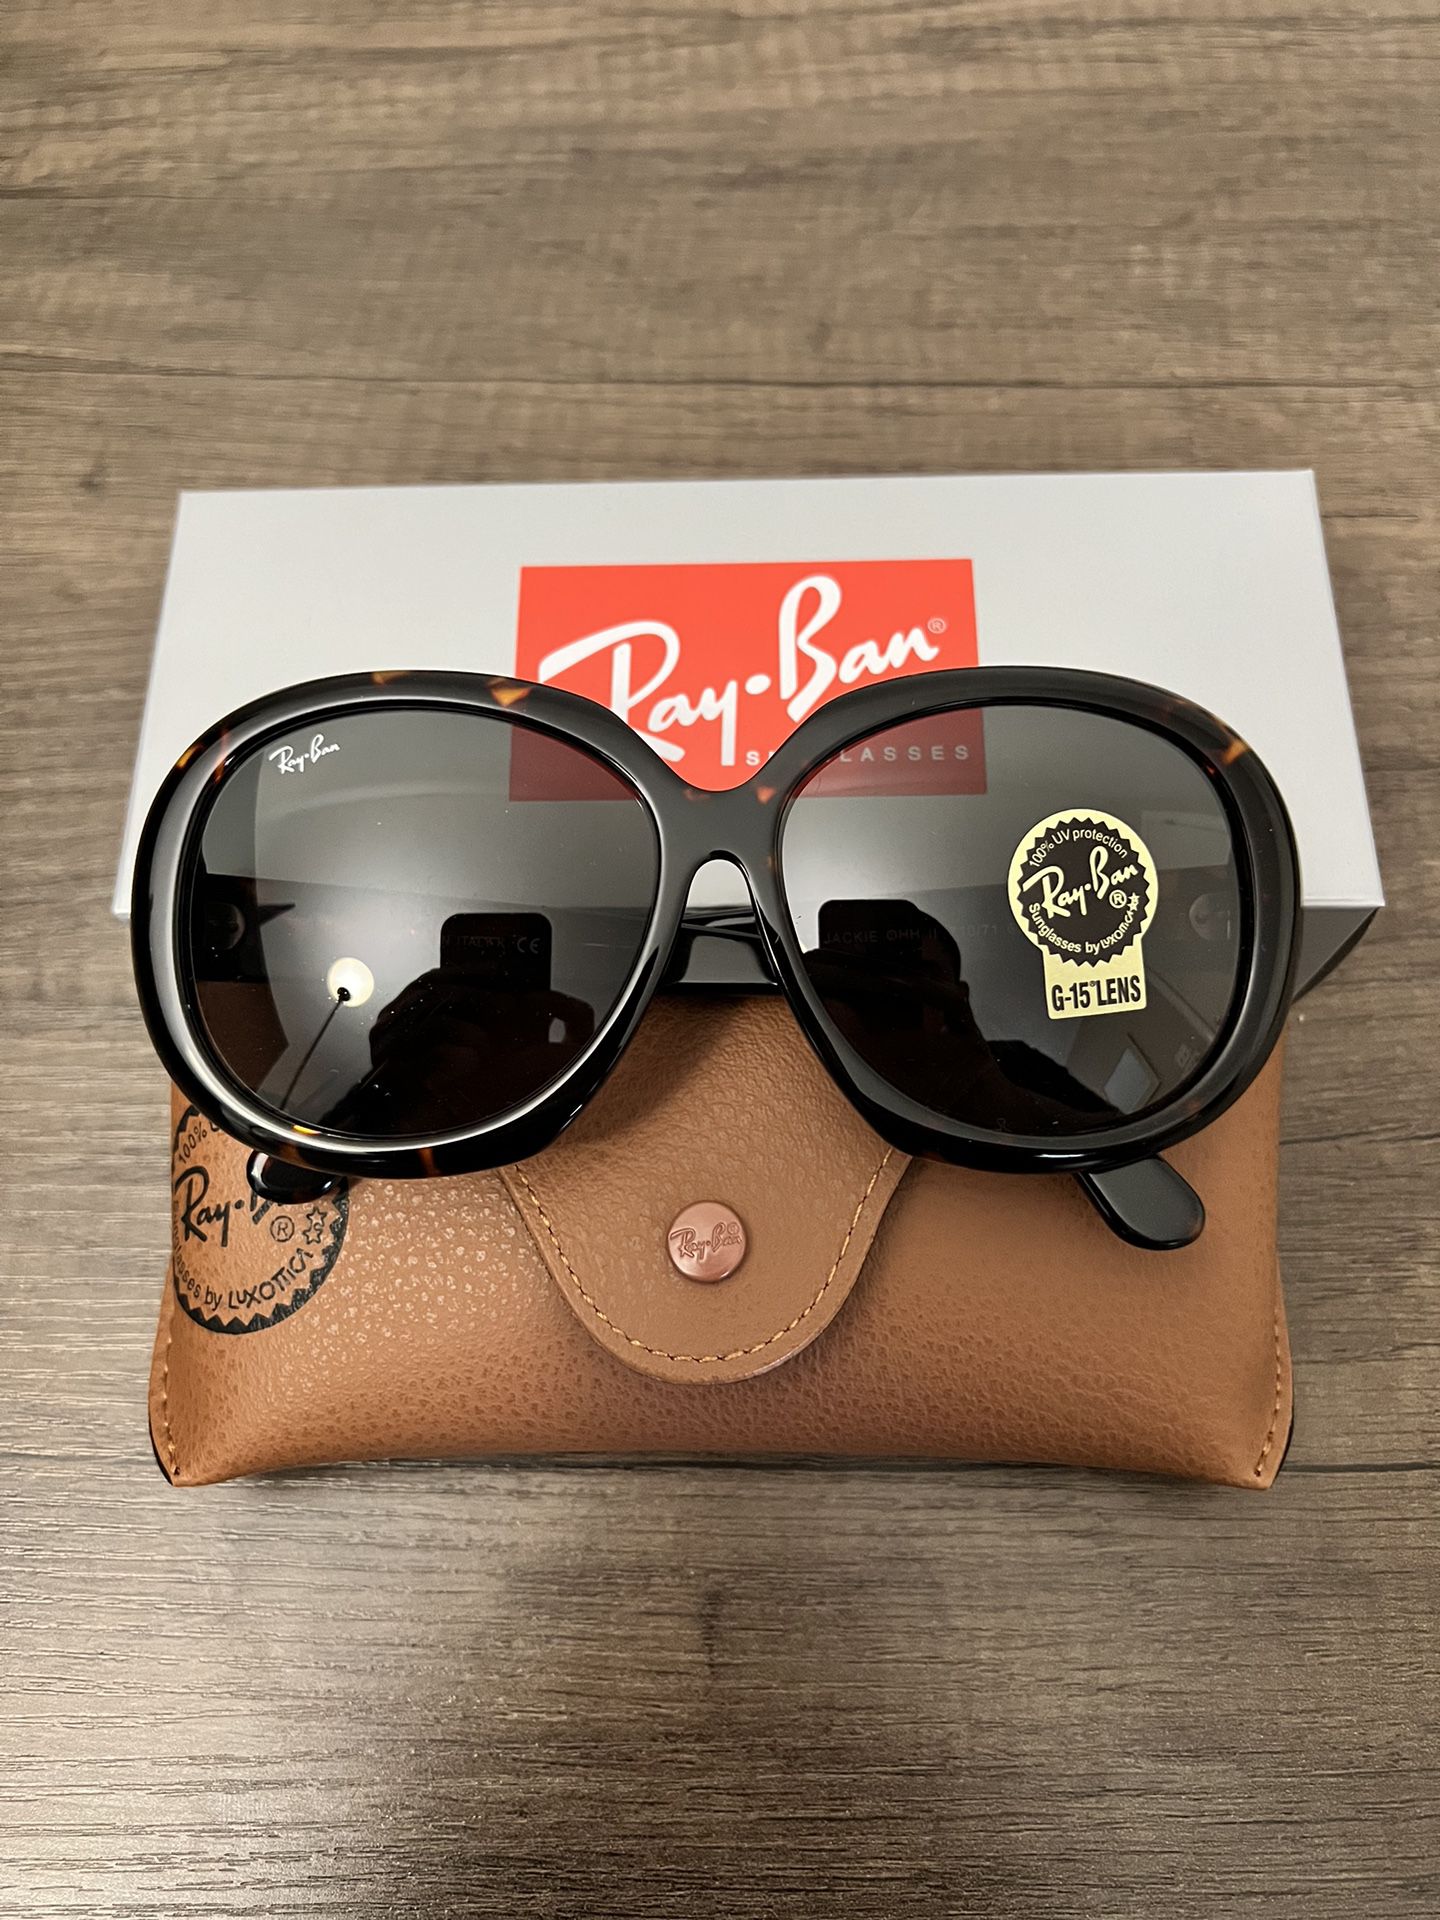 Jackie Ohh NEW RayBan Sunglasses with original Ray Ban Packaging 